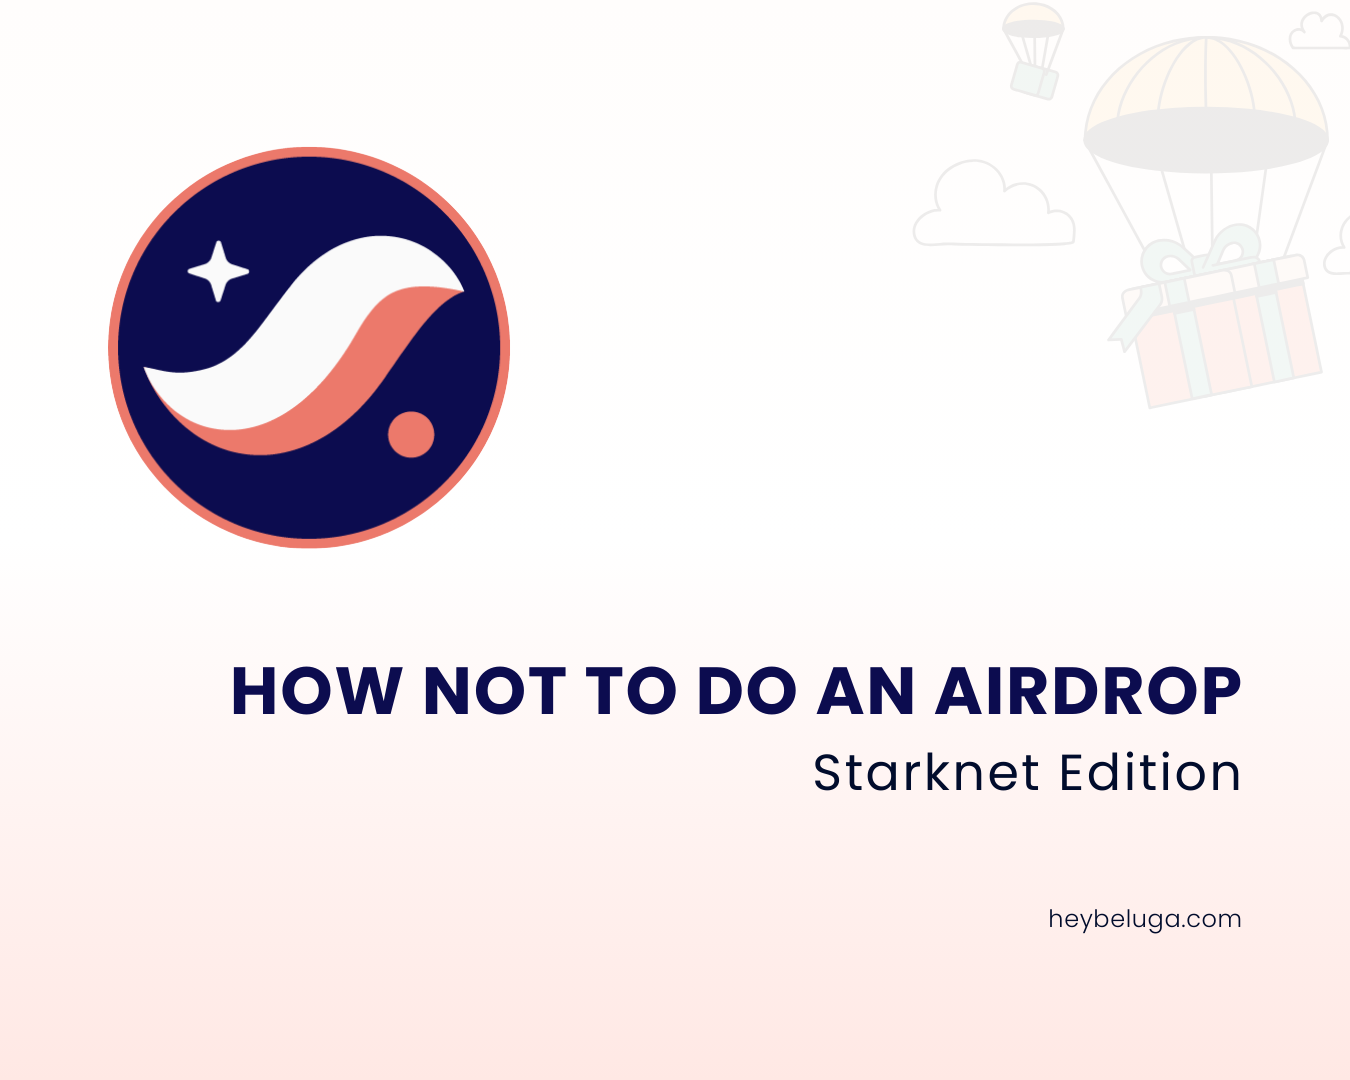 Image for Starknet: How Not to do an Airdrop